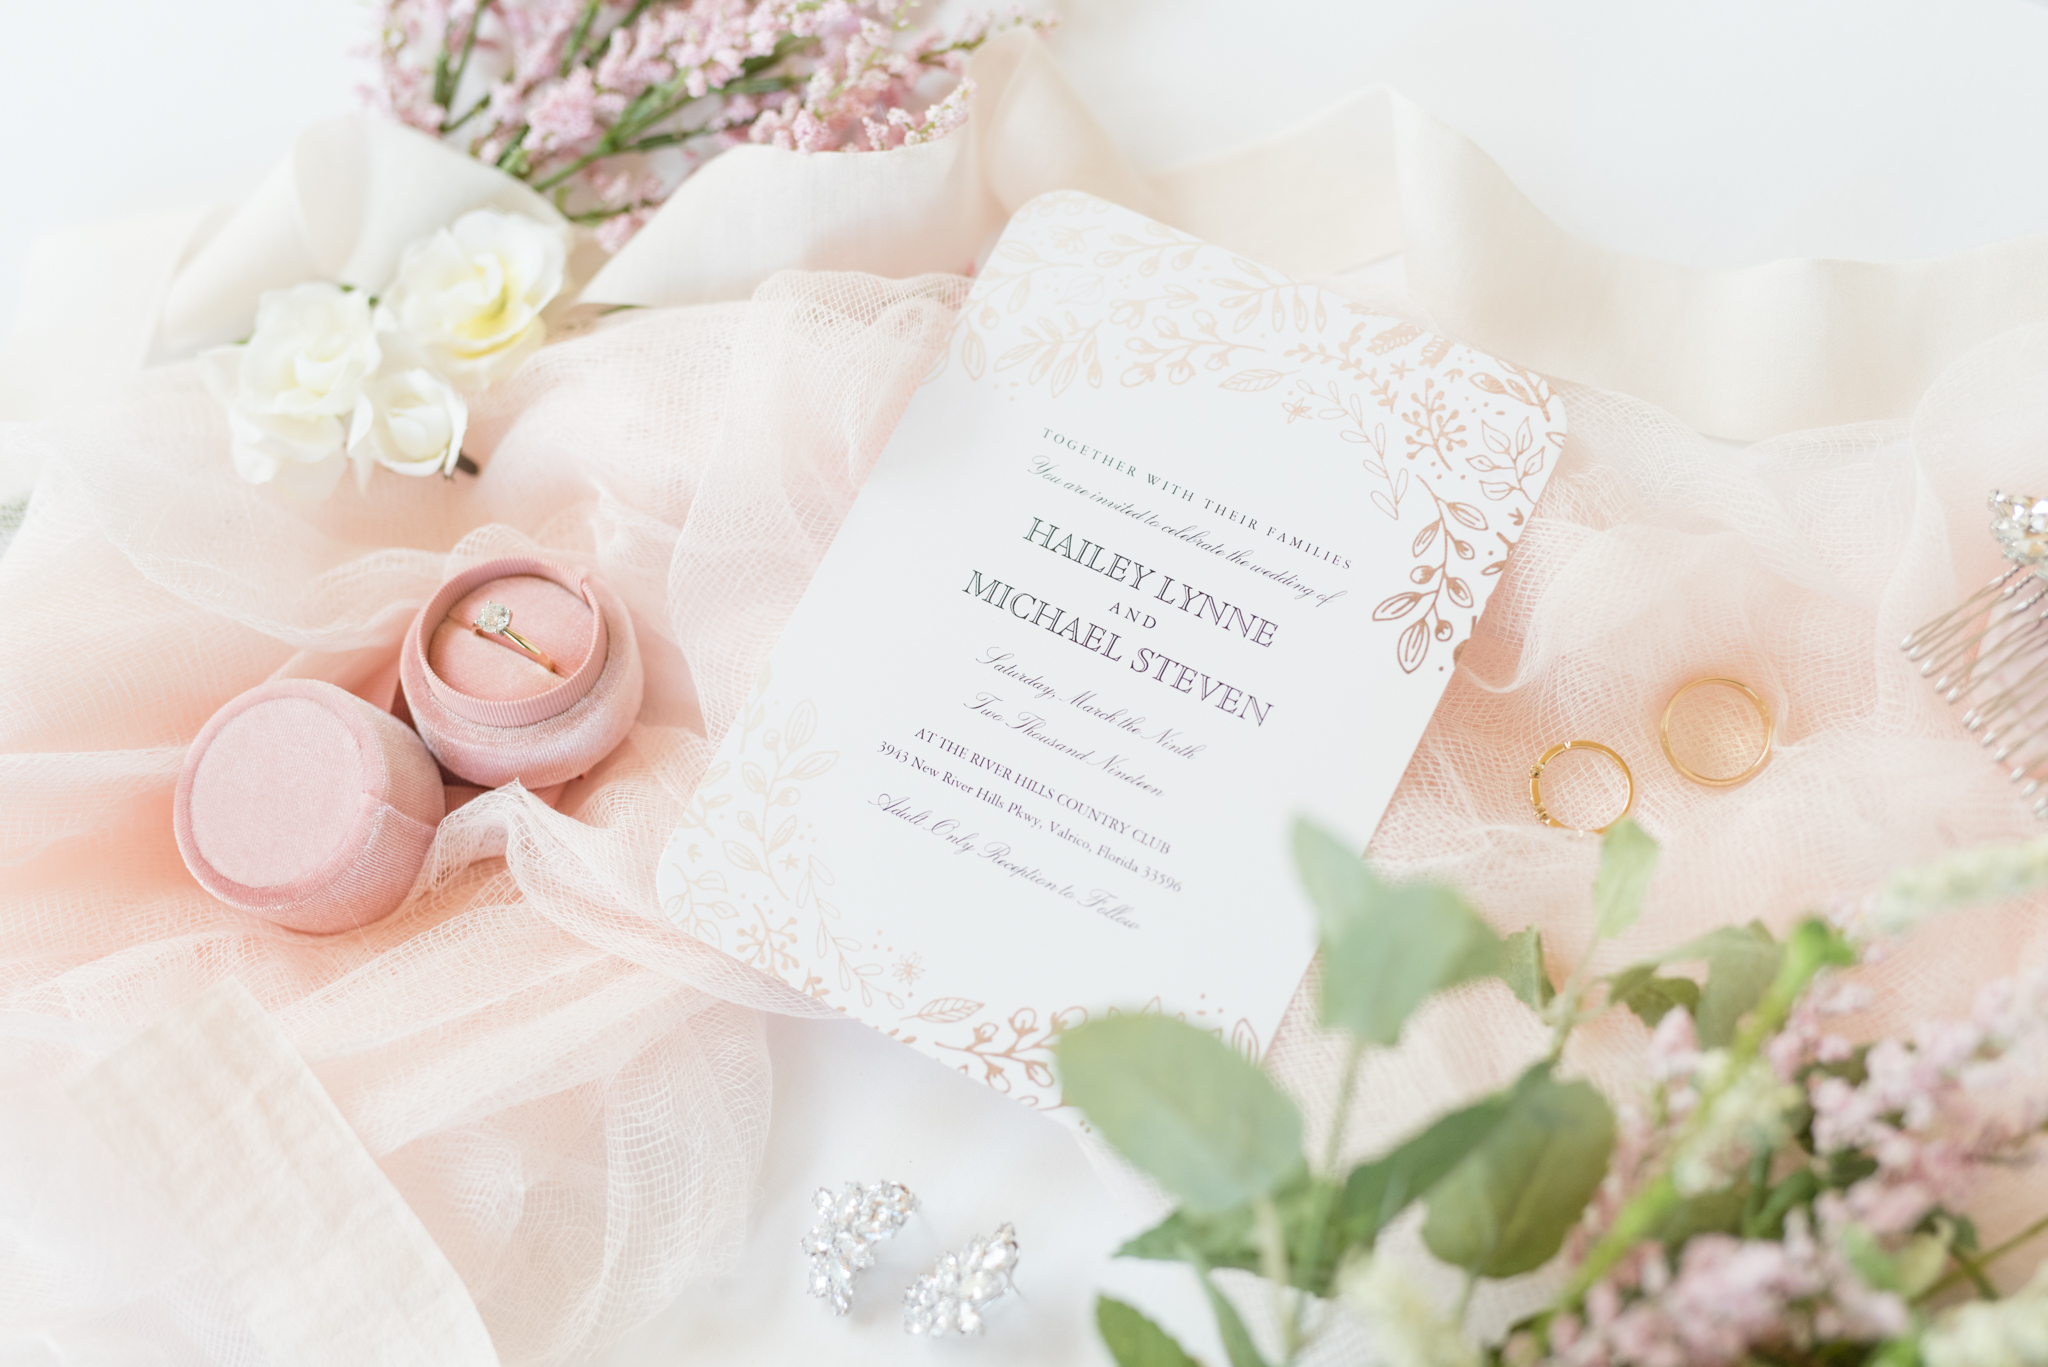 Wedding invitation and other details.